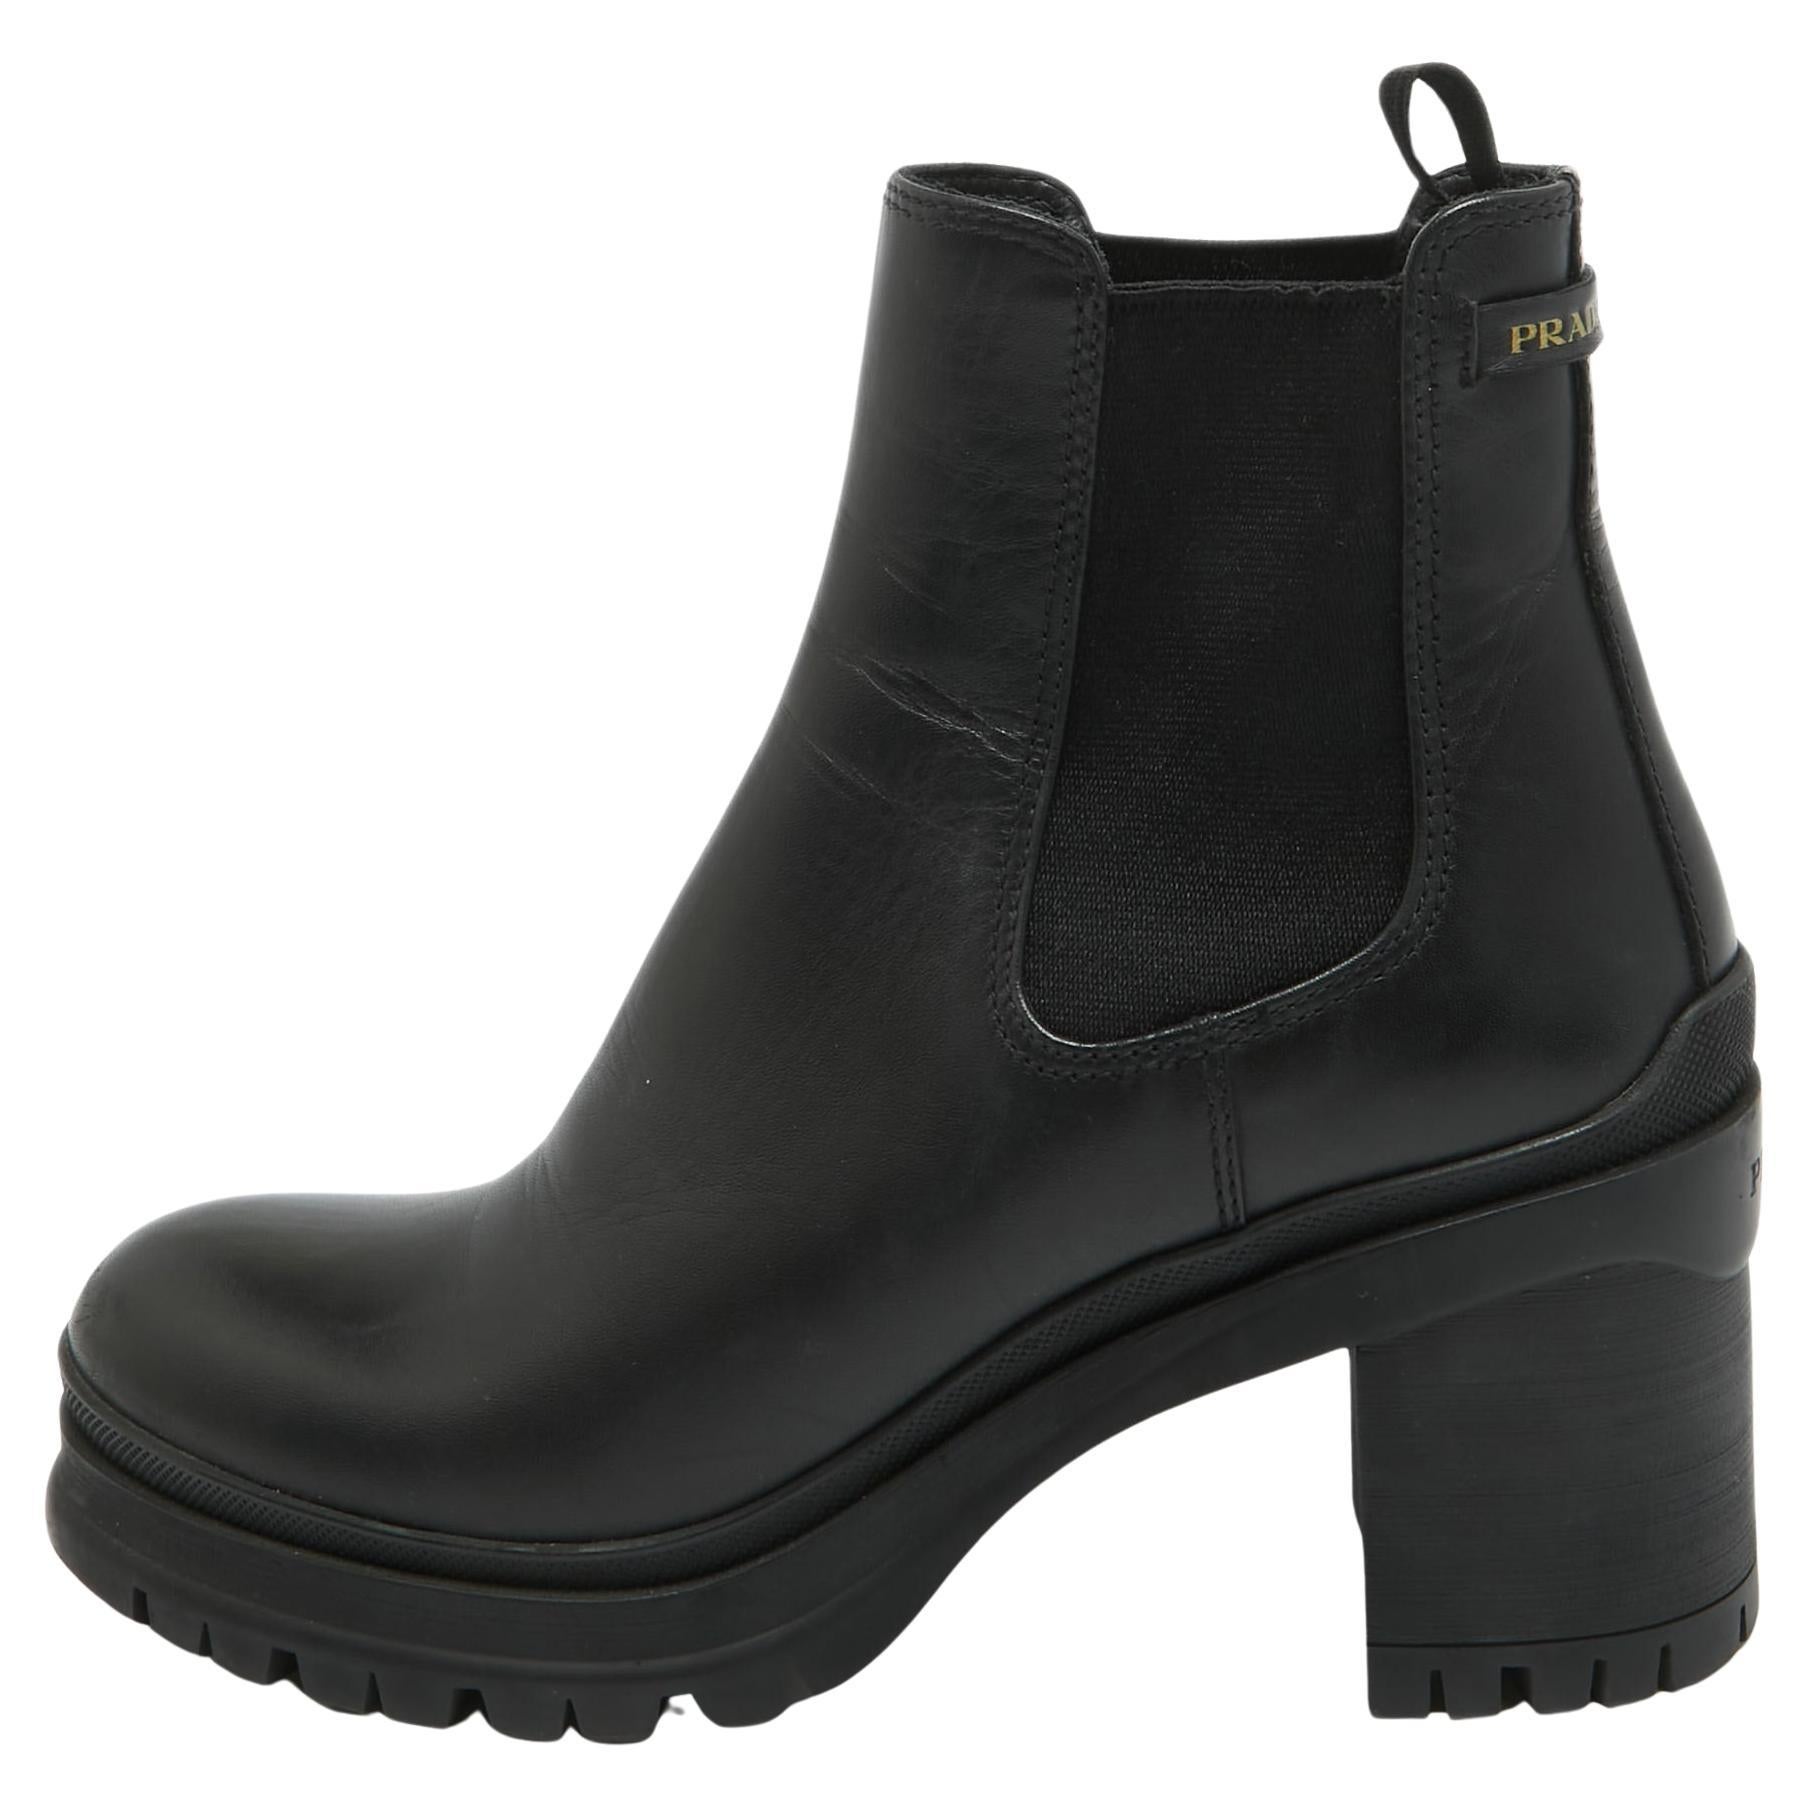 Prada Black Leather Ankle Length Boots Size 38.5 For Sale